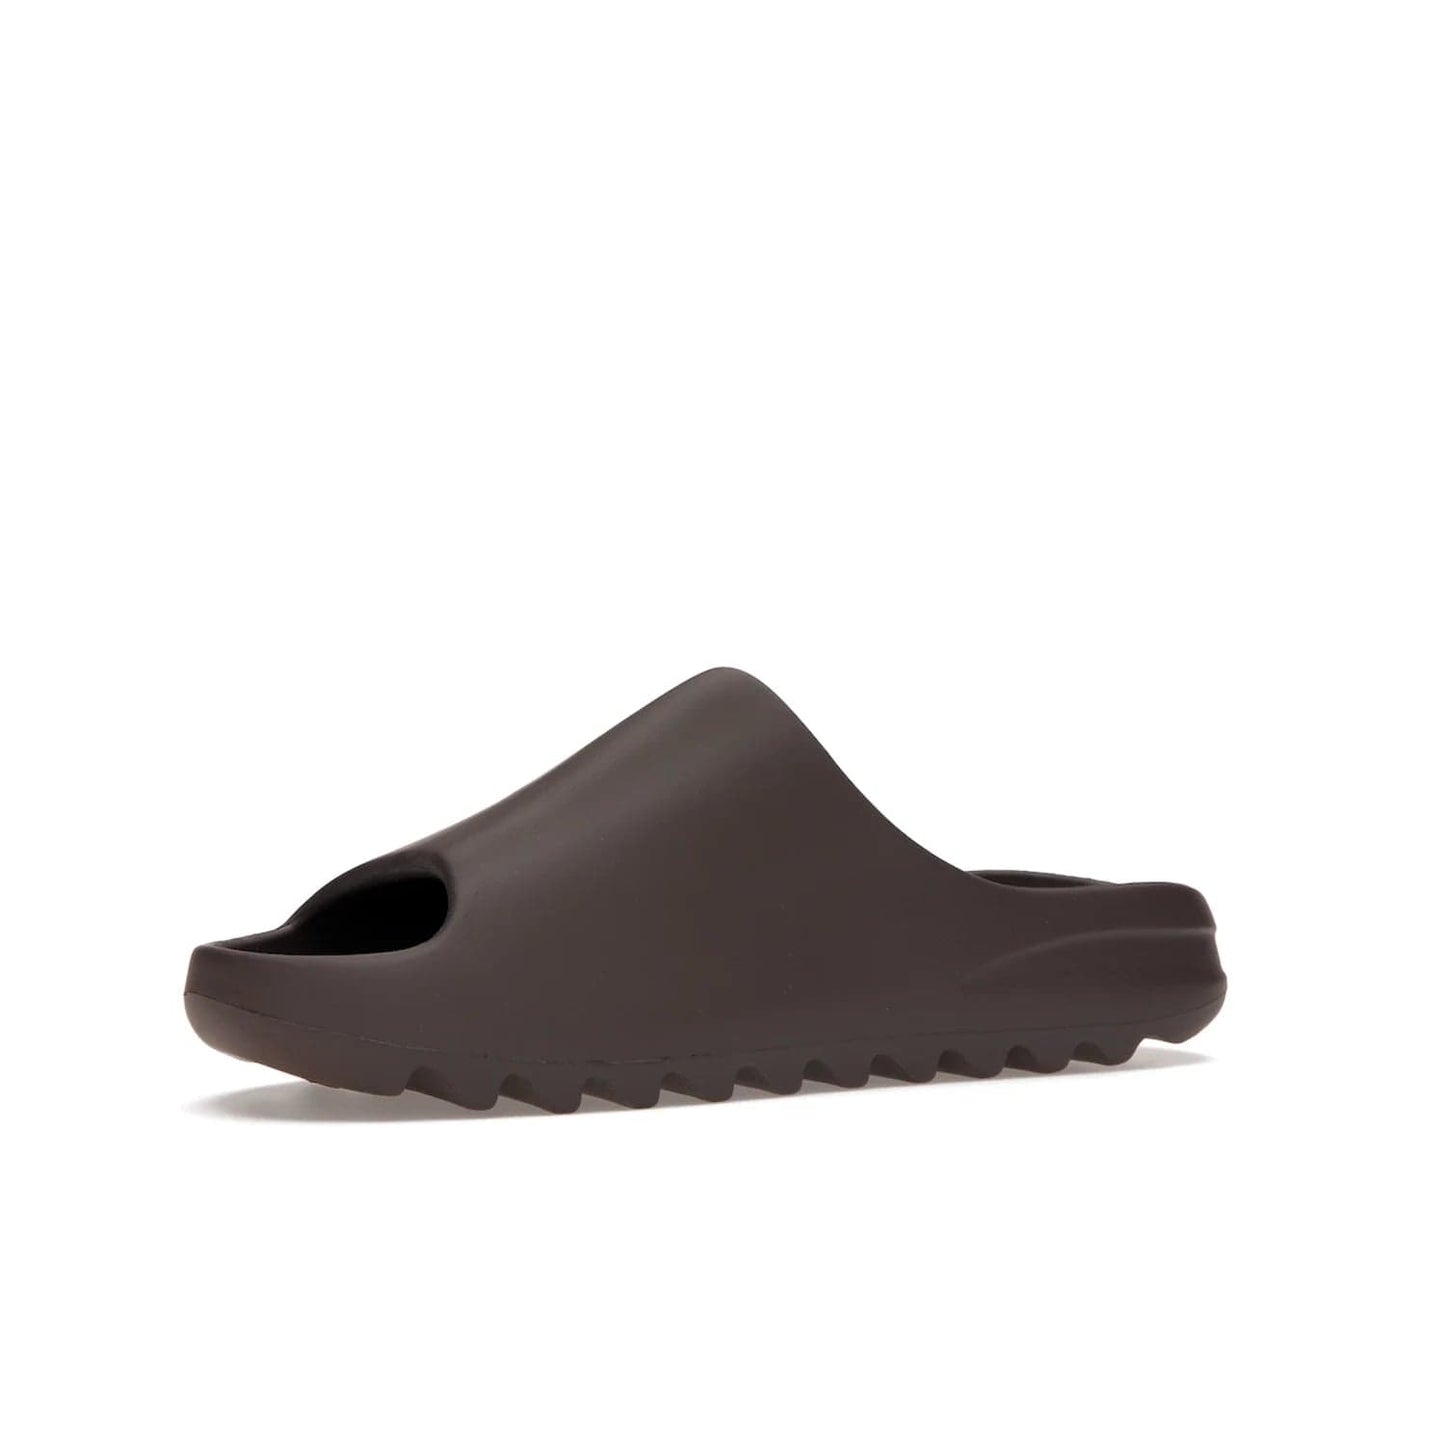 adidas Yeezy Slide Soot - Image 16 - Only at www.BallersClubKickz.com - Shop the Yeezy Slide Soot sneaker by Adidas, a sleek blend of form and function. Monochrome silhouette in Soot/Soot/Soot. Lightweight EVA foam offers comfort and durability. Get the must-have style today.